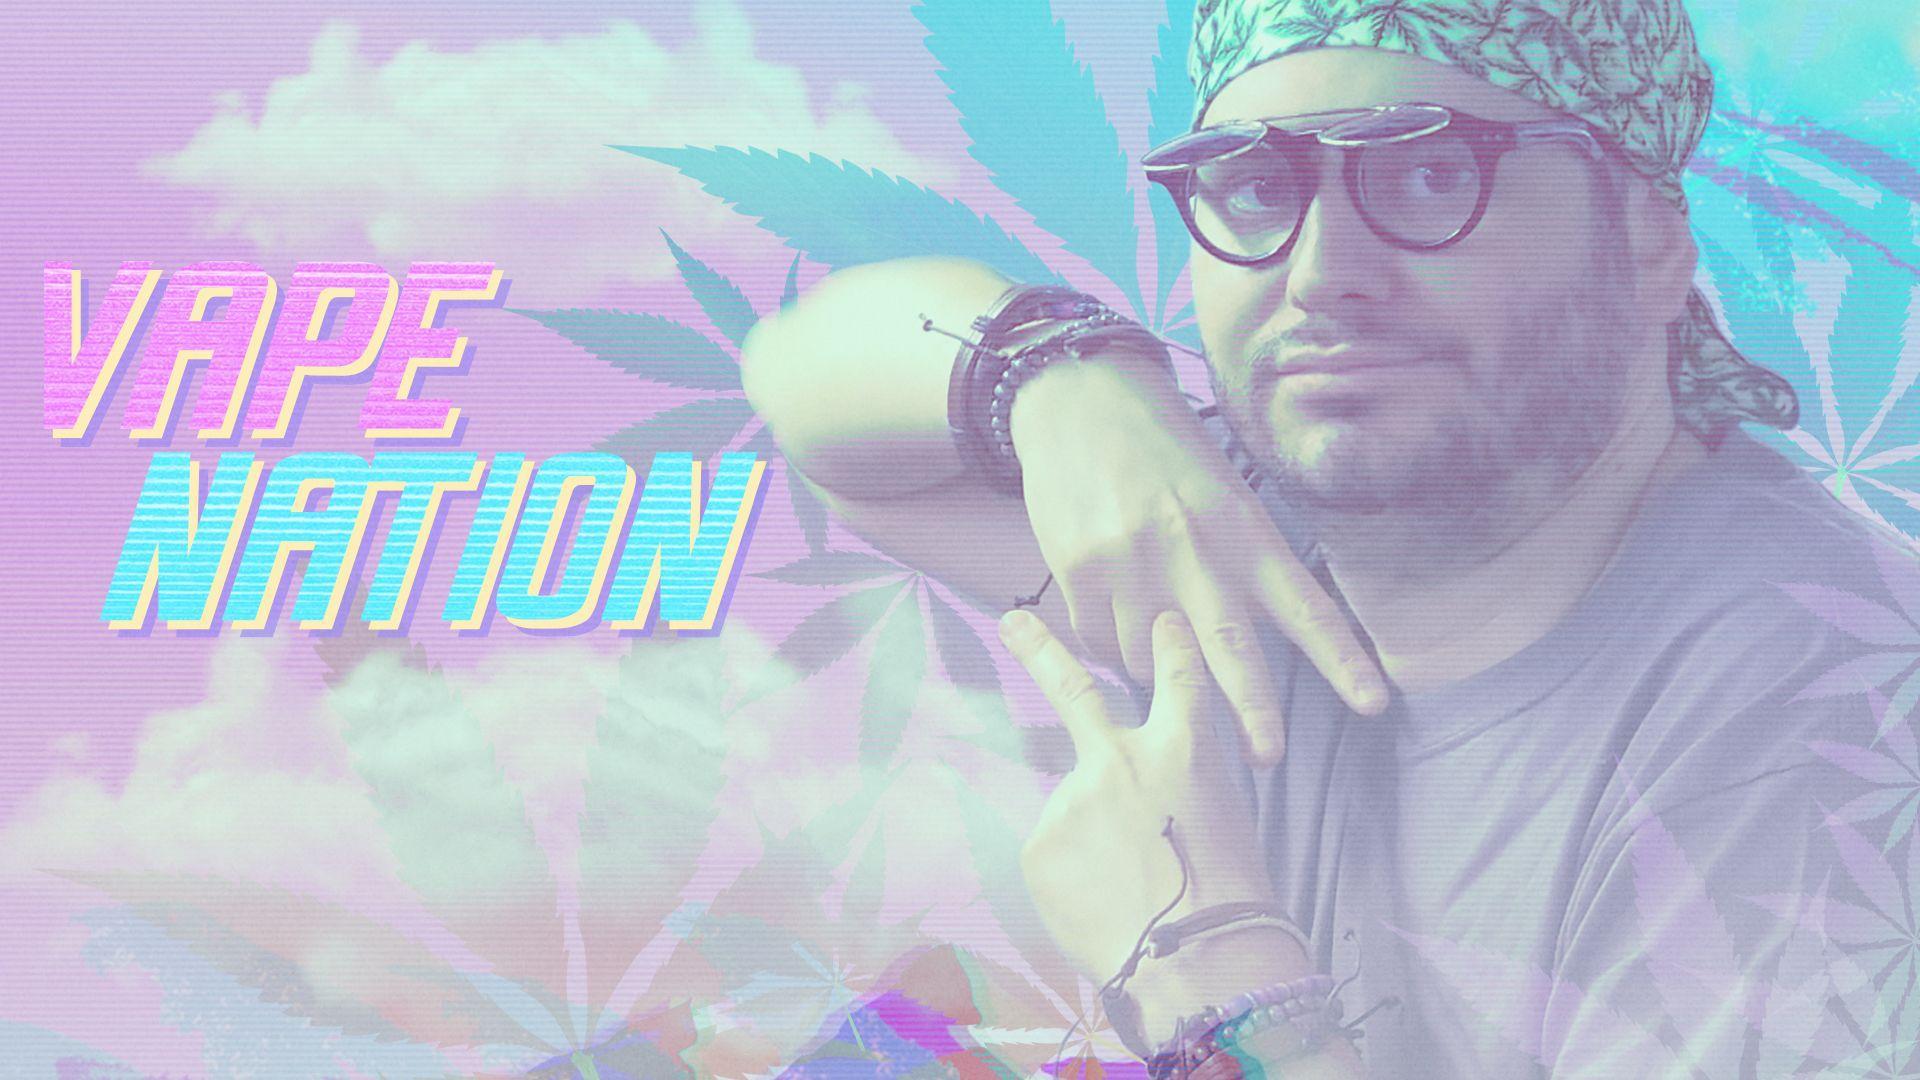 Vape Nation wallpapers I made for ya&: h3h3productions